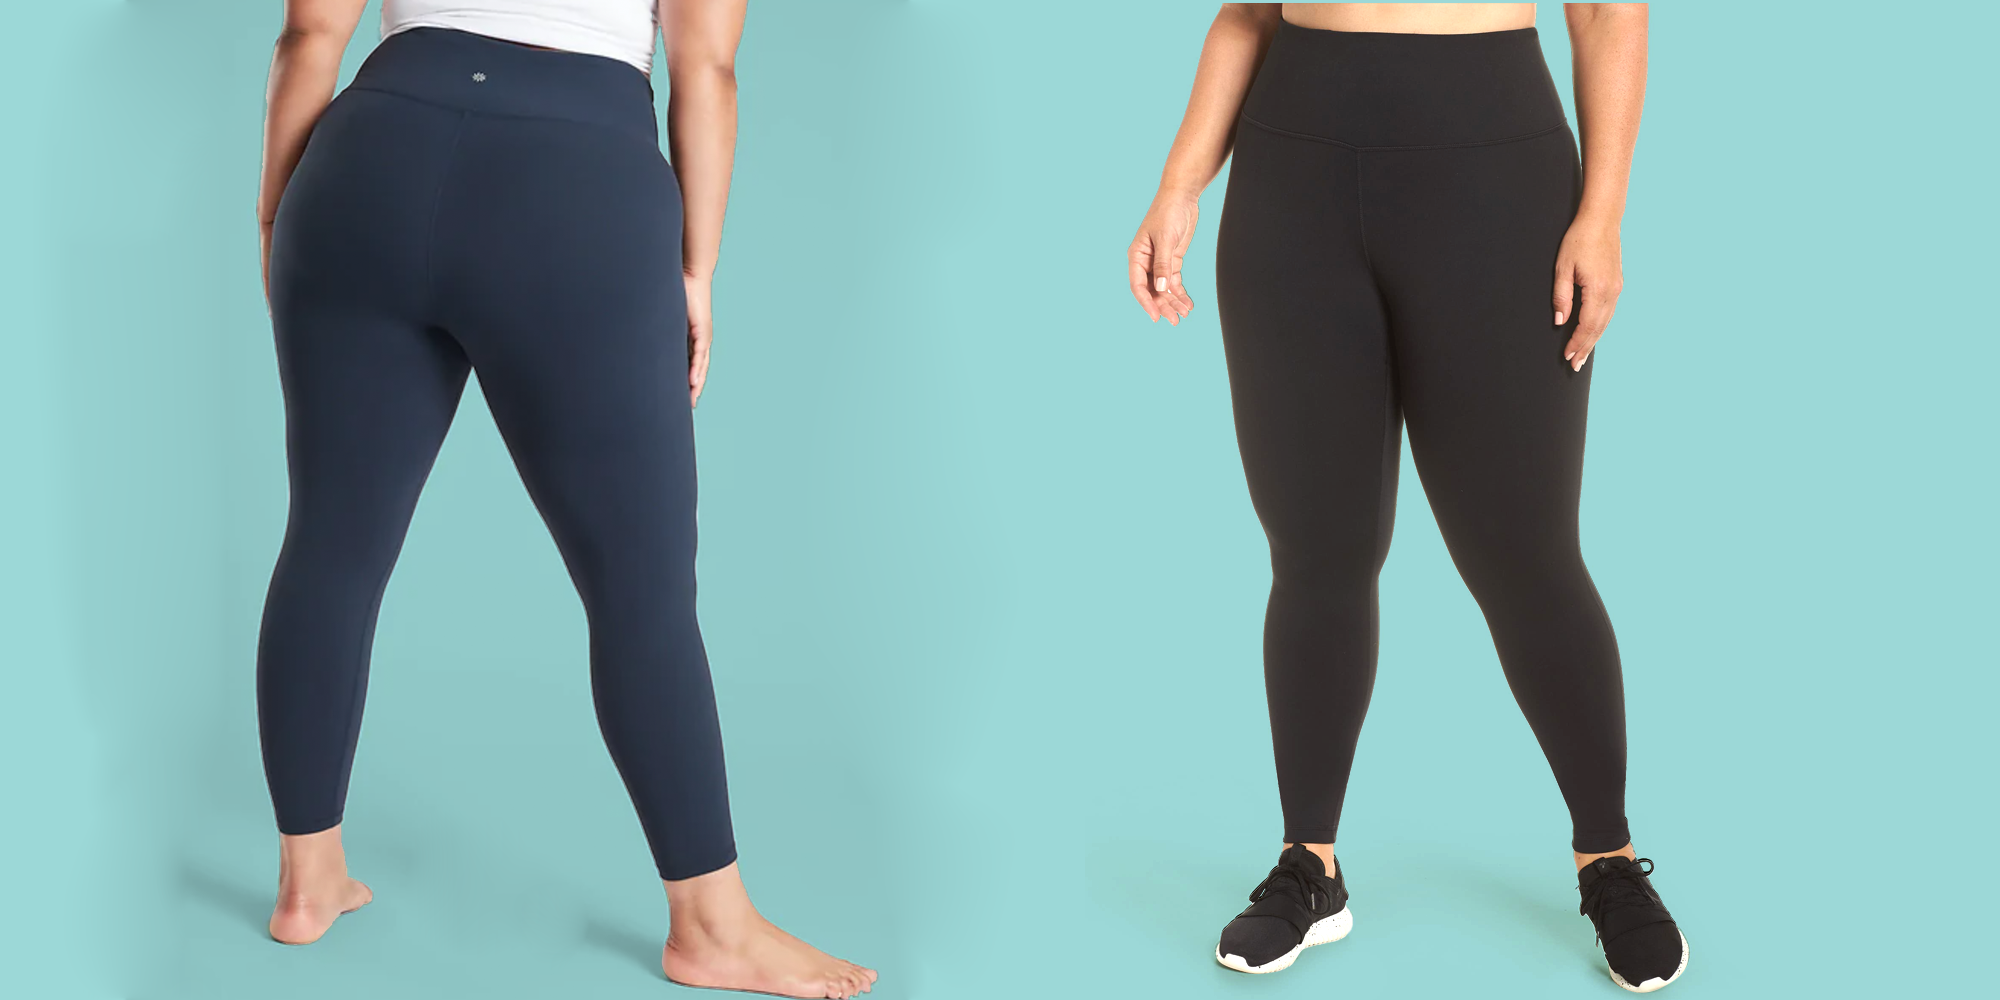 Belmont Leggings, now in print! Plus activewear collection in sizes 12-32 |  Cashmerette